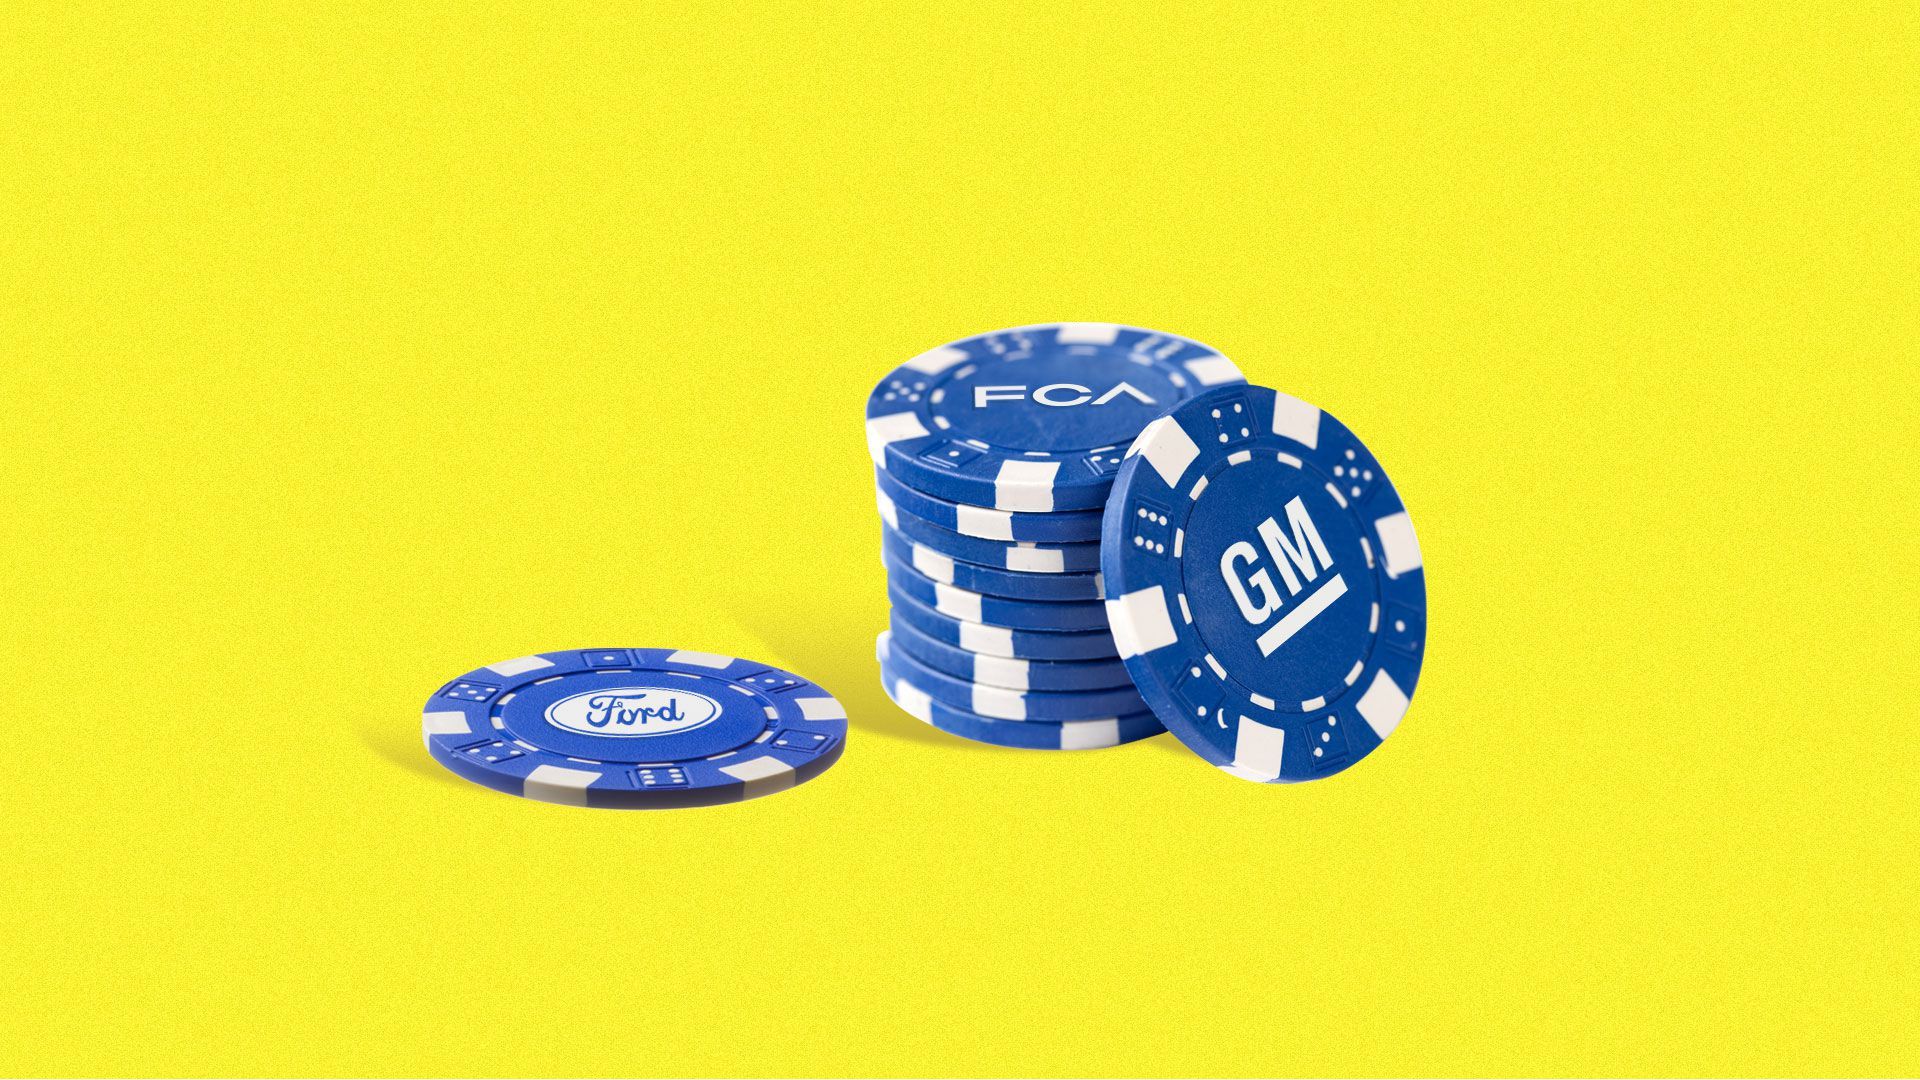 Illustration of poker chips with the logos of GM, FCA and Ford